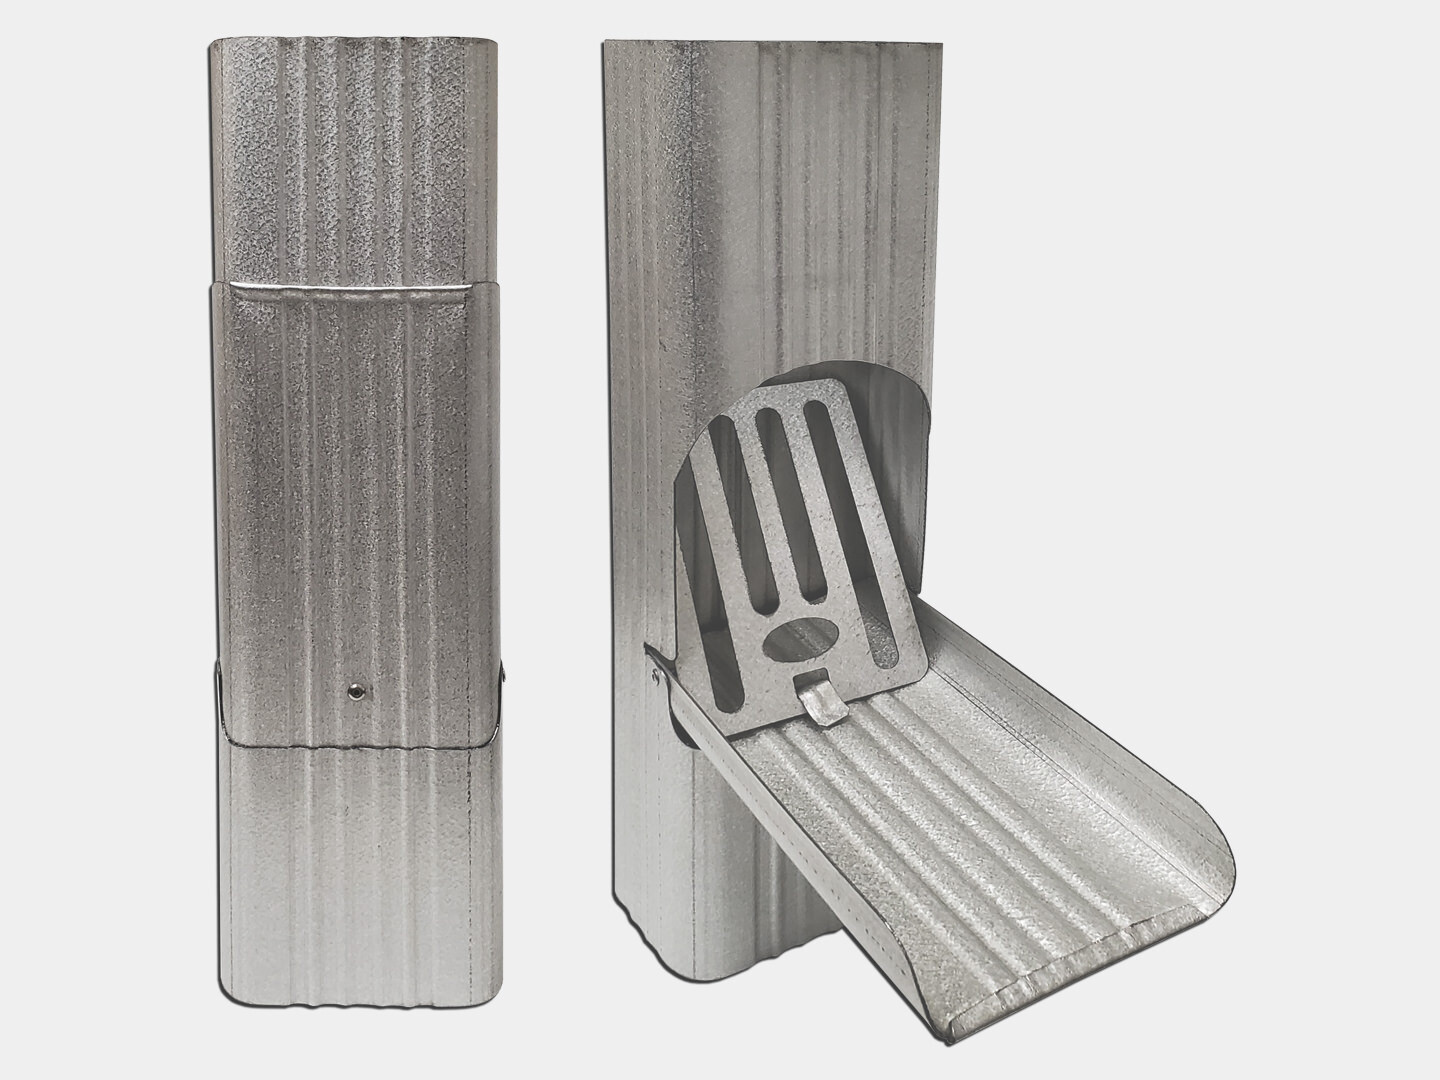 Square Corrugated Galvalume Downspout Cleanout